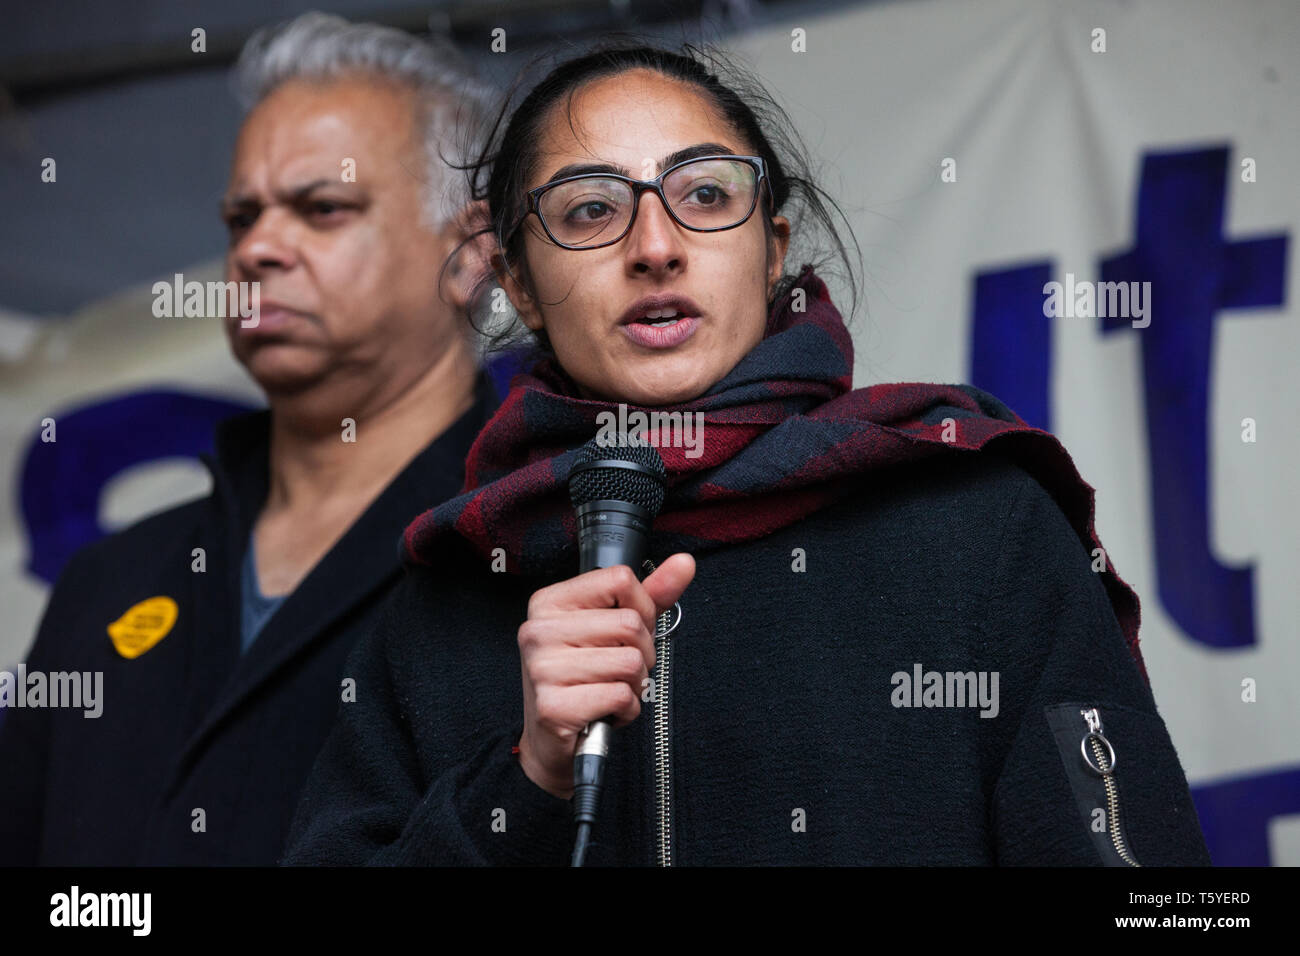 Southall, UK. 27th April 2019. Cllr Jaskiran Chohan of Ealing Labour addresses members of the local community and supporters at a rally outside Southall Town Hall to honour the memories of Gurdip Singh Chaggar and Blair Peach on the 40th anniversary of their deaths. Gurdip Singh Chaggar, a young Asian boy, was the victim of a racially motivated attack whist Blair Peach, a teacher, was killed by the Metropolitan Police’s Special Patrol Group during a peaceful march against the National Front demonstration. Credit: Mark Kerrison/Alamy Live News Stock Photo